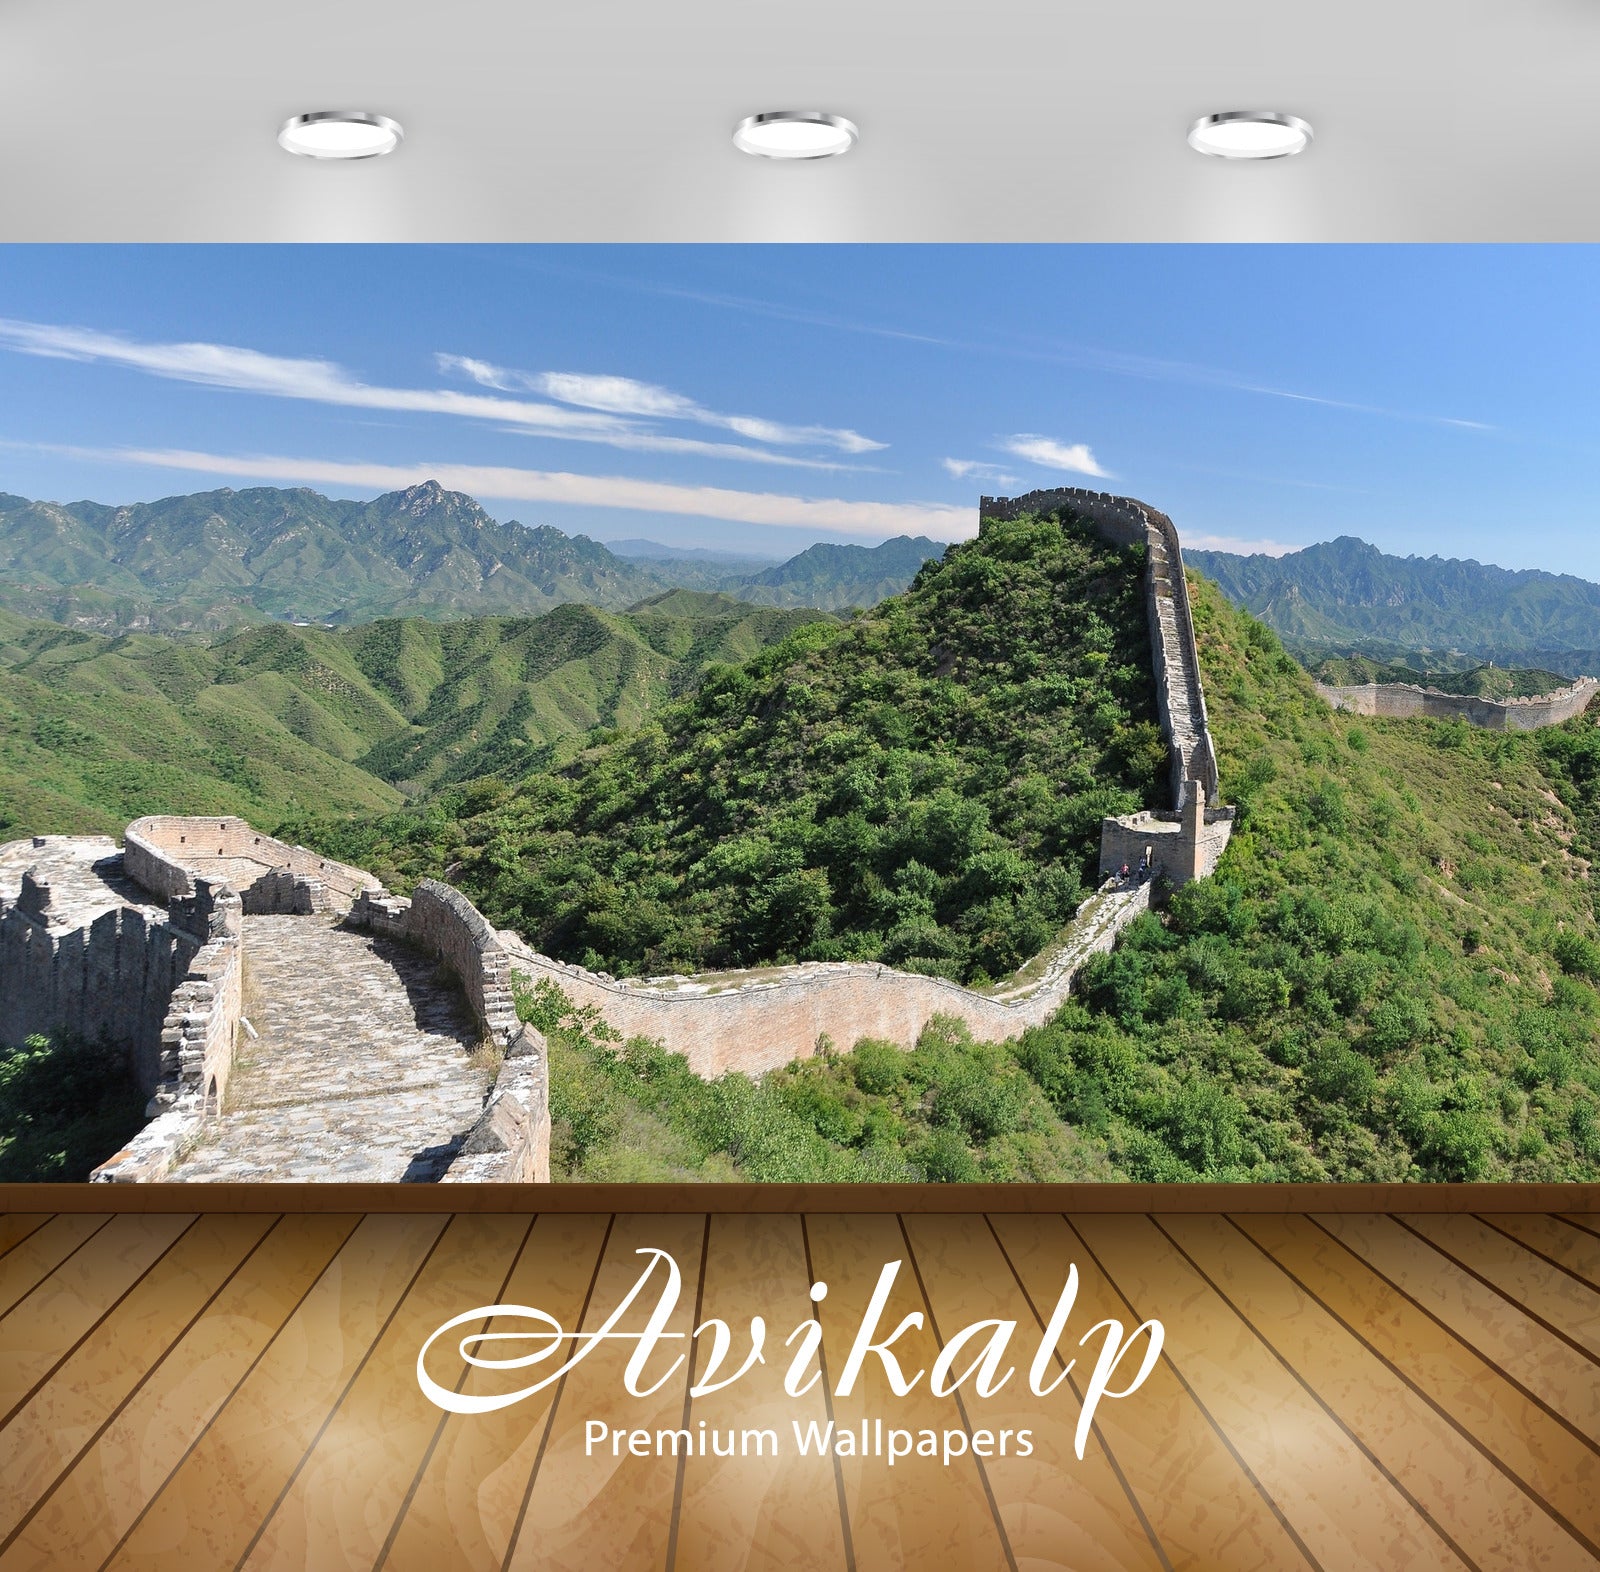 Avikalp Exclusive Awi5550 Great Wall Of China Nature Full HD Wallpapers for Living room, Hall, Kids